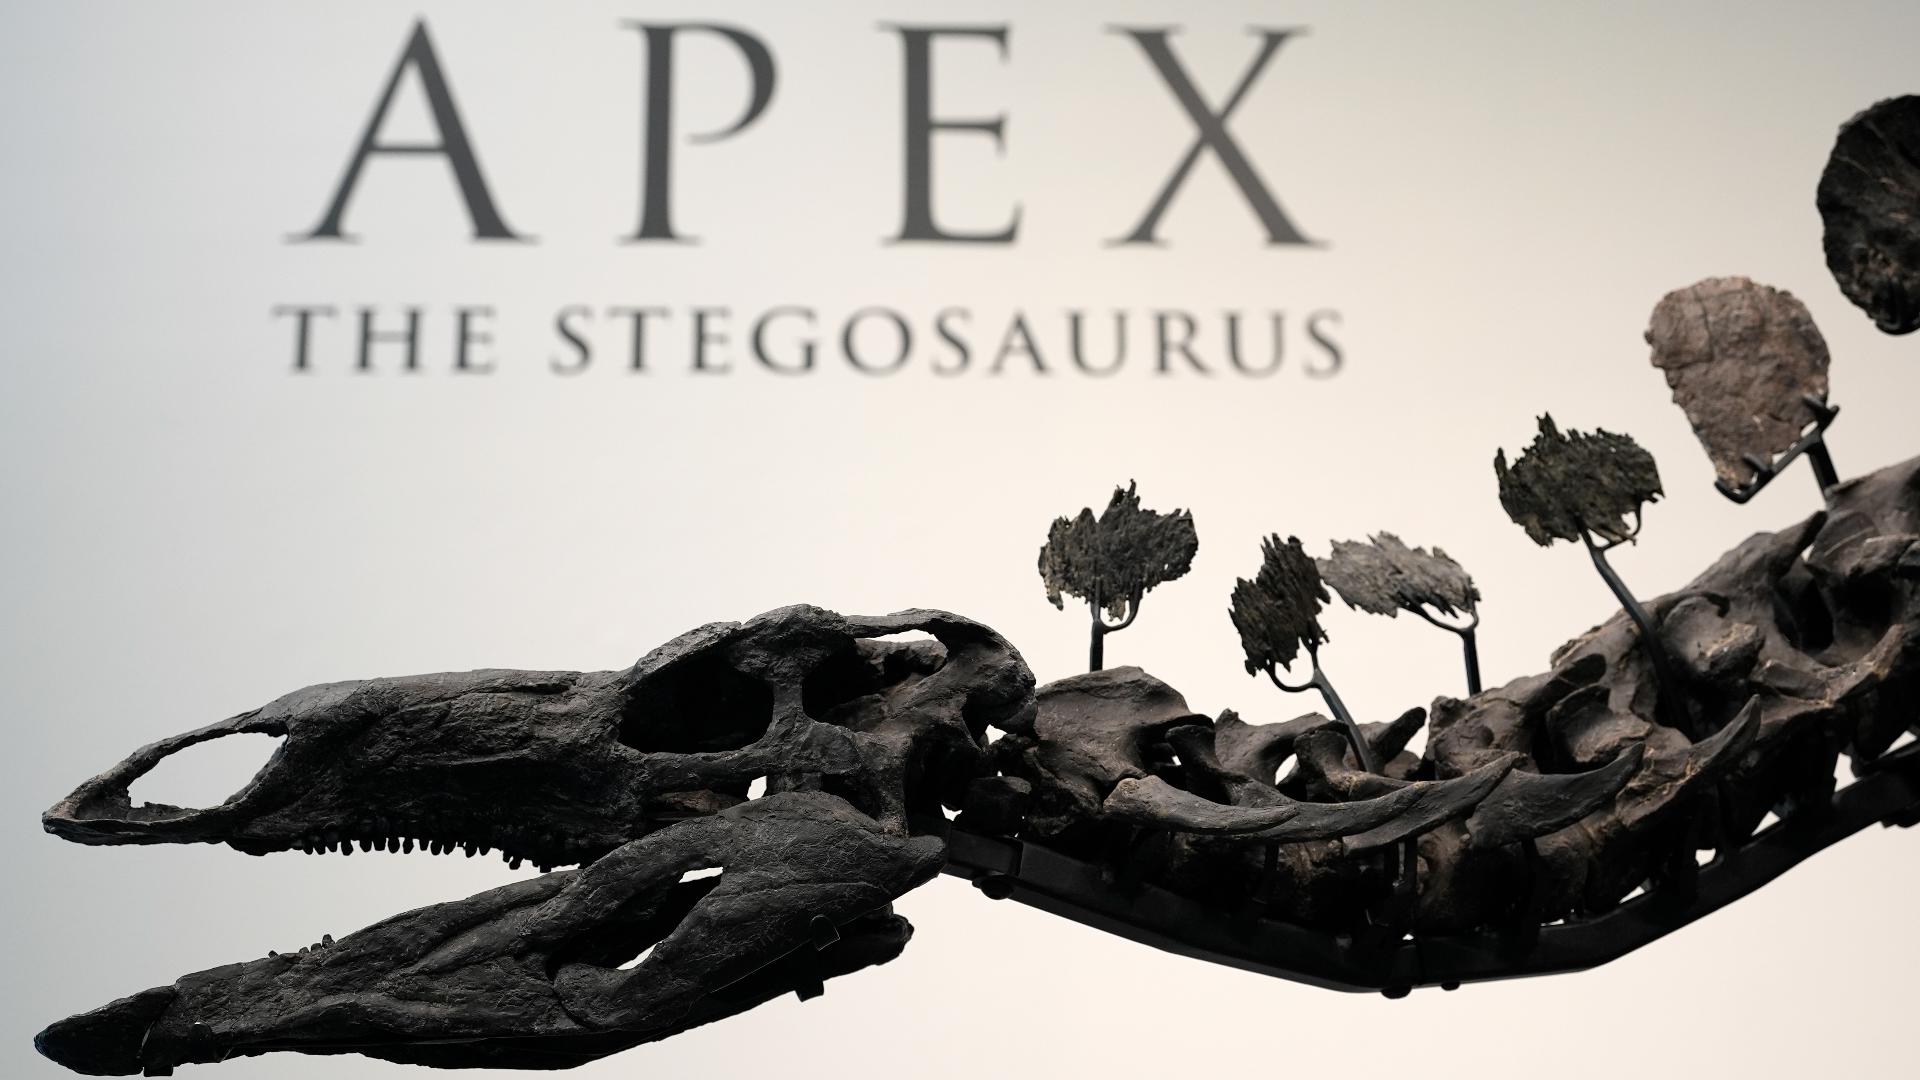 The bones of a 161-million-year-old Stegosaurus are on display at Sotheby’s in New York as part of the annual Geek Week sale series.